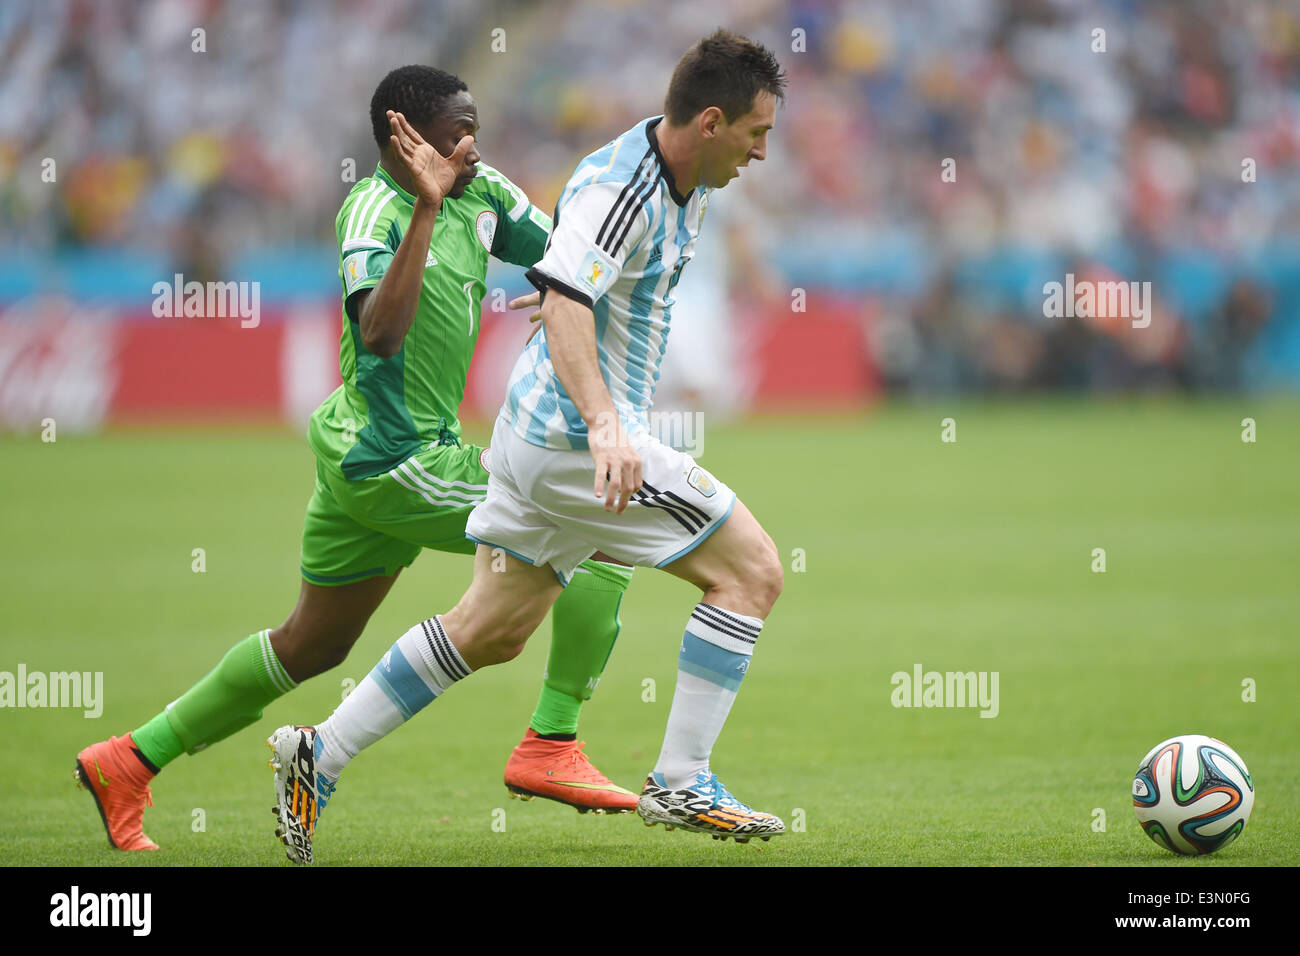 Porto Alegre, Brazil. 25th June, 2014. PORTO ALEGRE BRAZIL -15 Jun: Leo Messi and Ahmed Musa in the match between Argentina and Nigeria, corresponding to the group F of the World Cup 2014, played at the Beira Rio stadium, on June 25, 2014. Photo: Edu Andrade/Urbanandsport/Nurphoto Credit:  Edu Andrade/NurPhoto/ZUMAPRESS.com/Alamy Live News Stock Photo